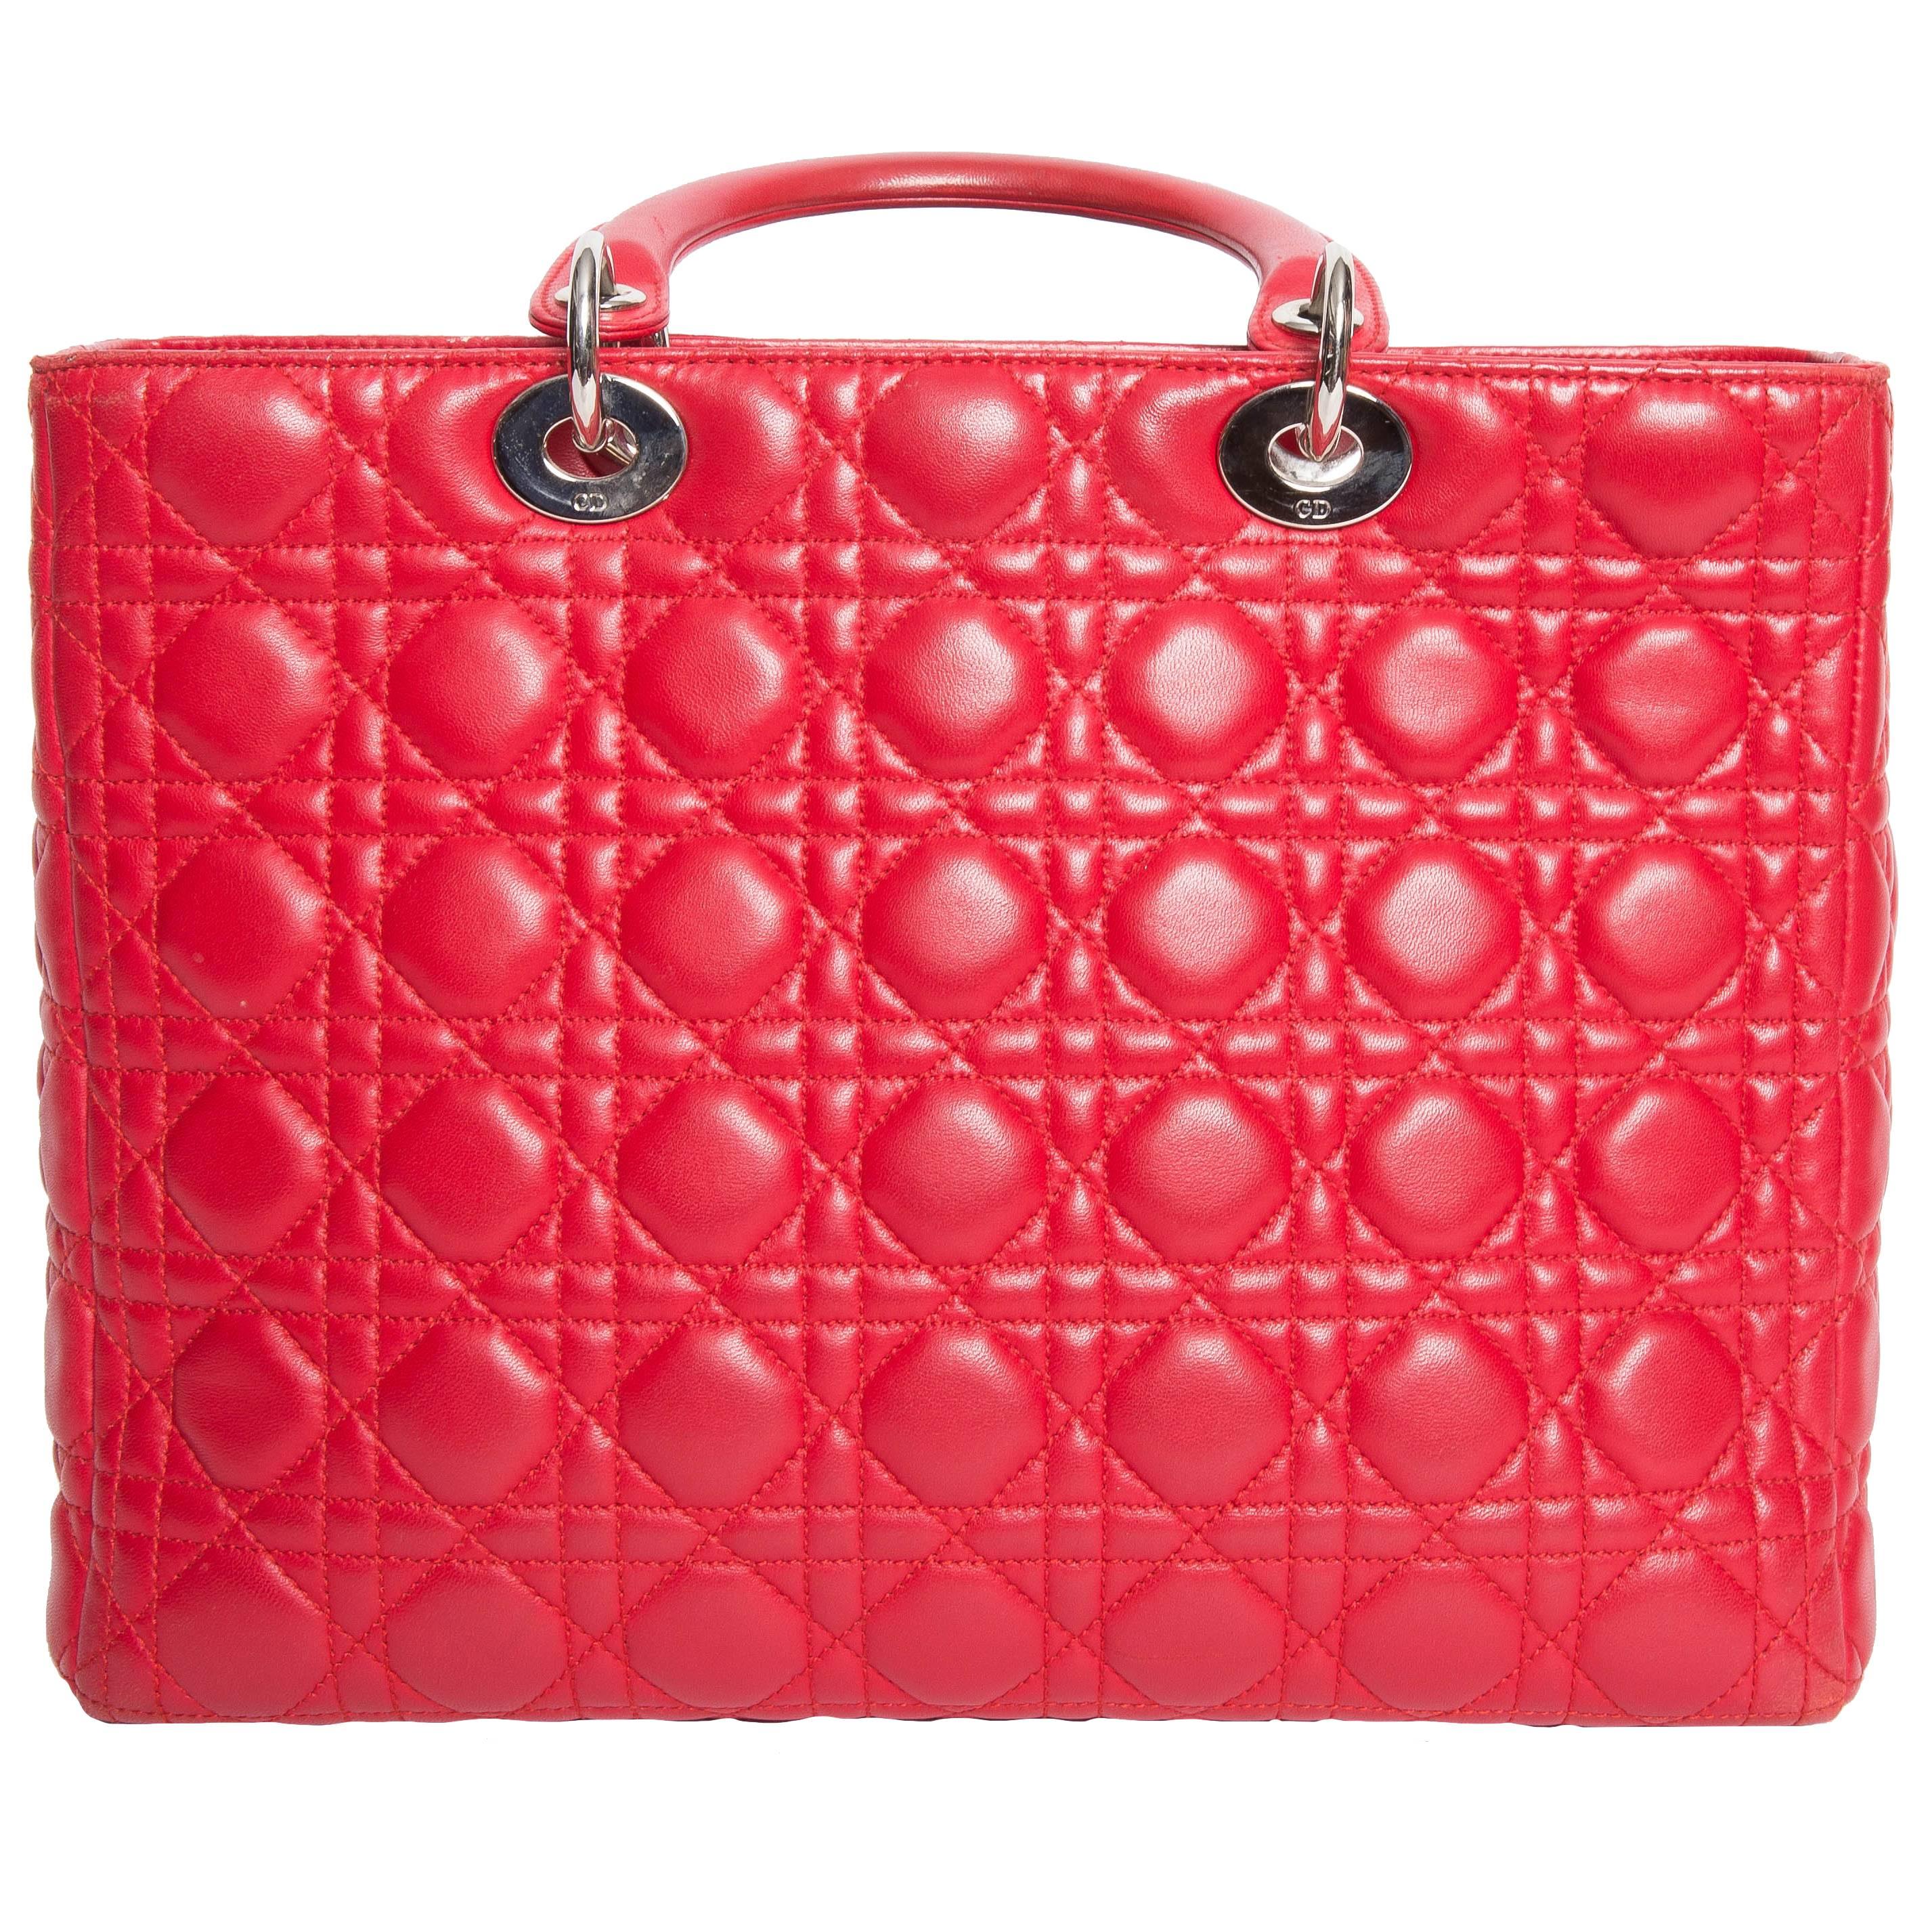 Christian Dior Lady Dior Red Leather Bag with Silver Hardware